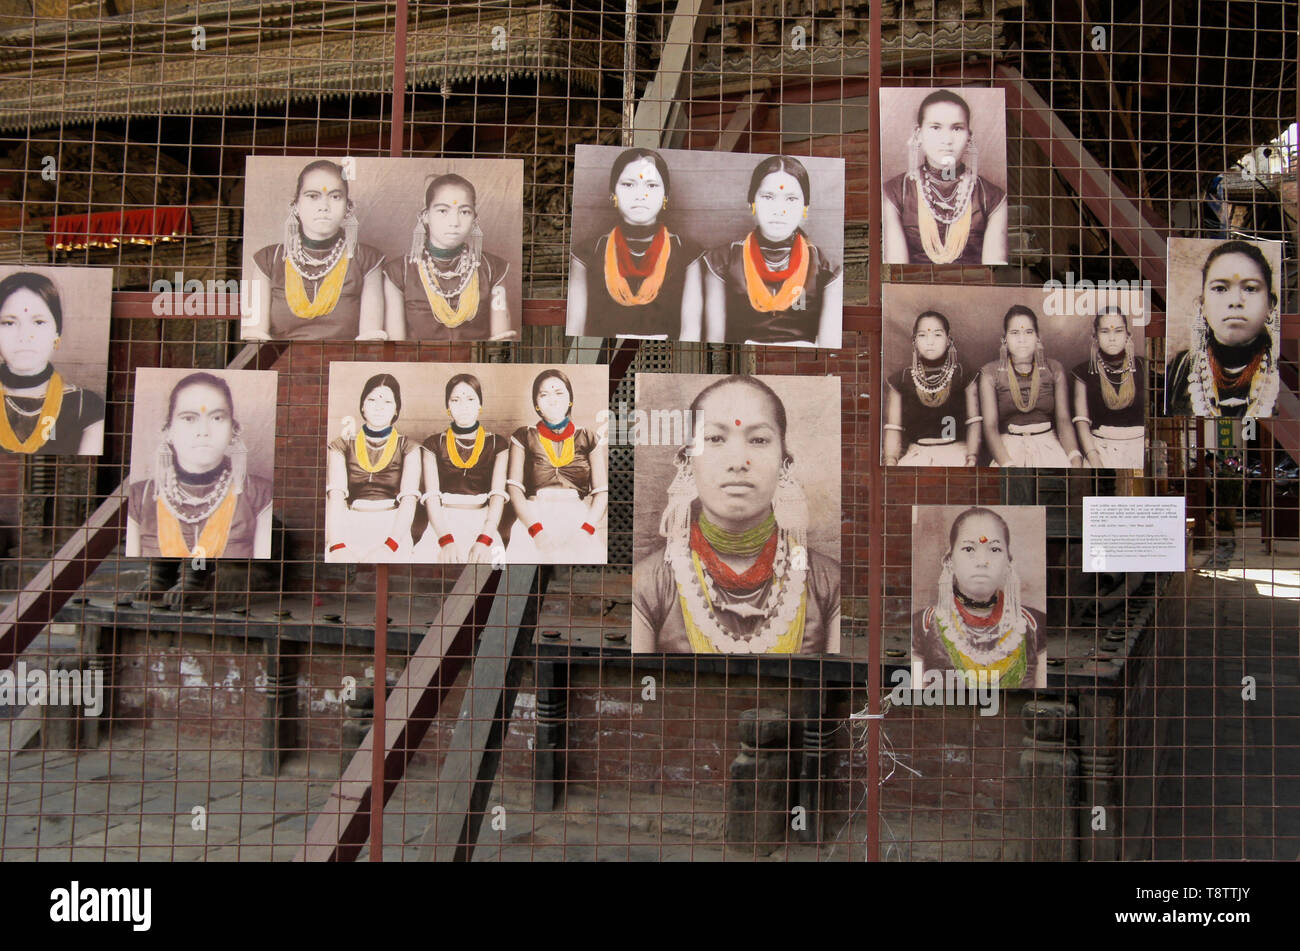 Photographs of Tharu women from Karjahi, Dang, who led a peasants' revolt against abusive landlords in 1980, displayed in Durbar Square, Patan, Kathma Stock Photo